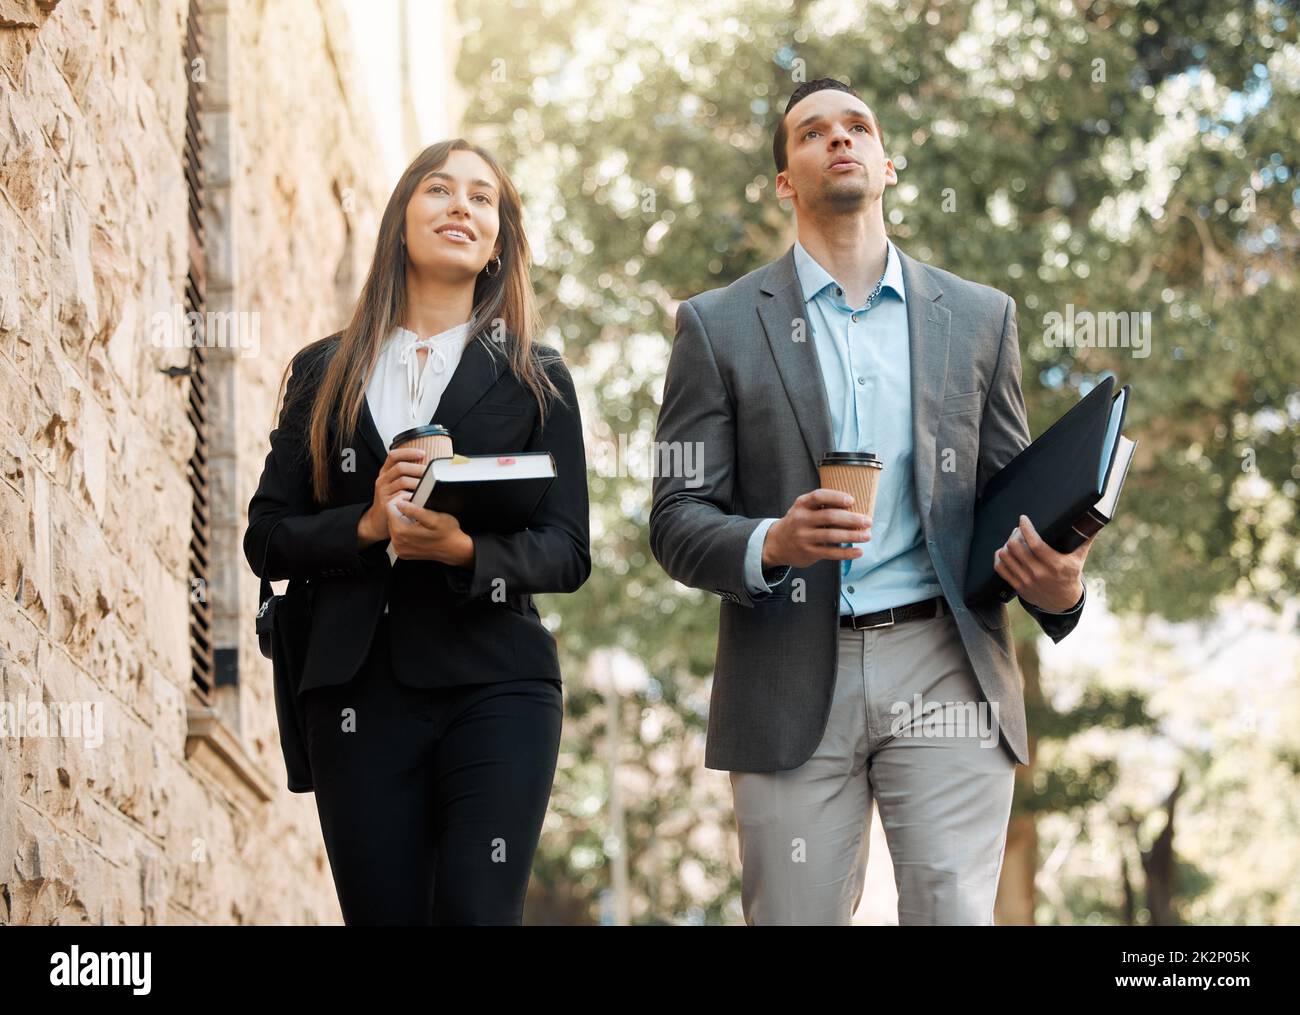 Every step brings you closer to justice. Shot of two business colleagues walking together in the city. Stock Photo